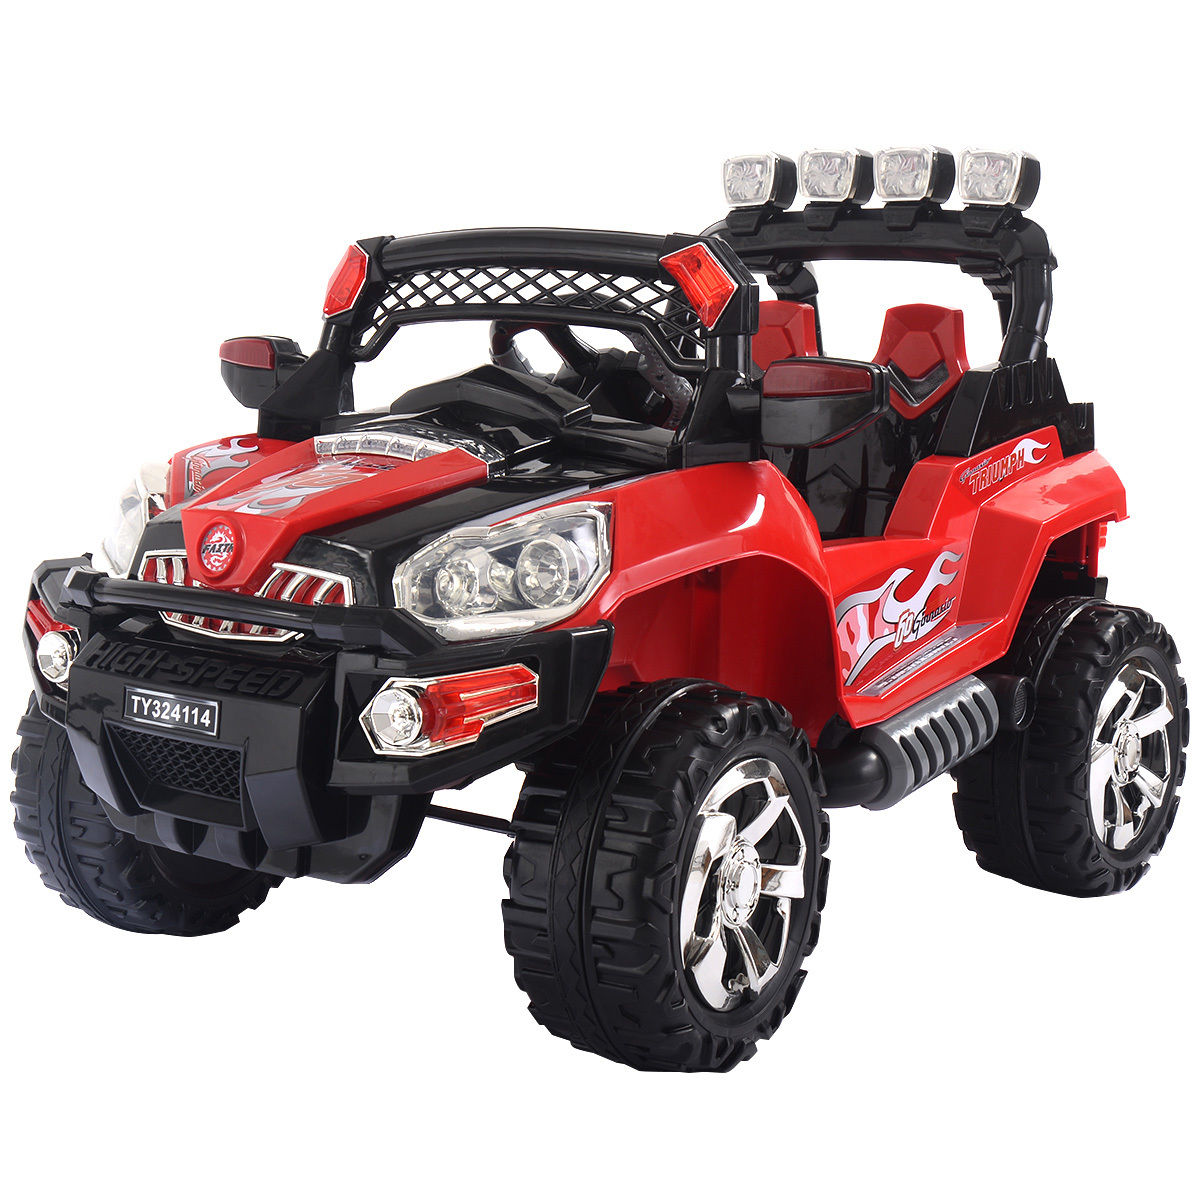 12V Kids Ride on Truck Car with LED Lights Only $169.99 Shipped!